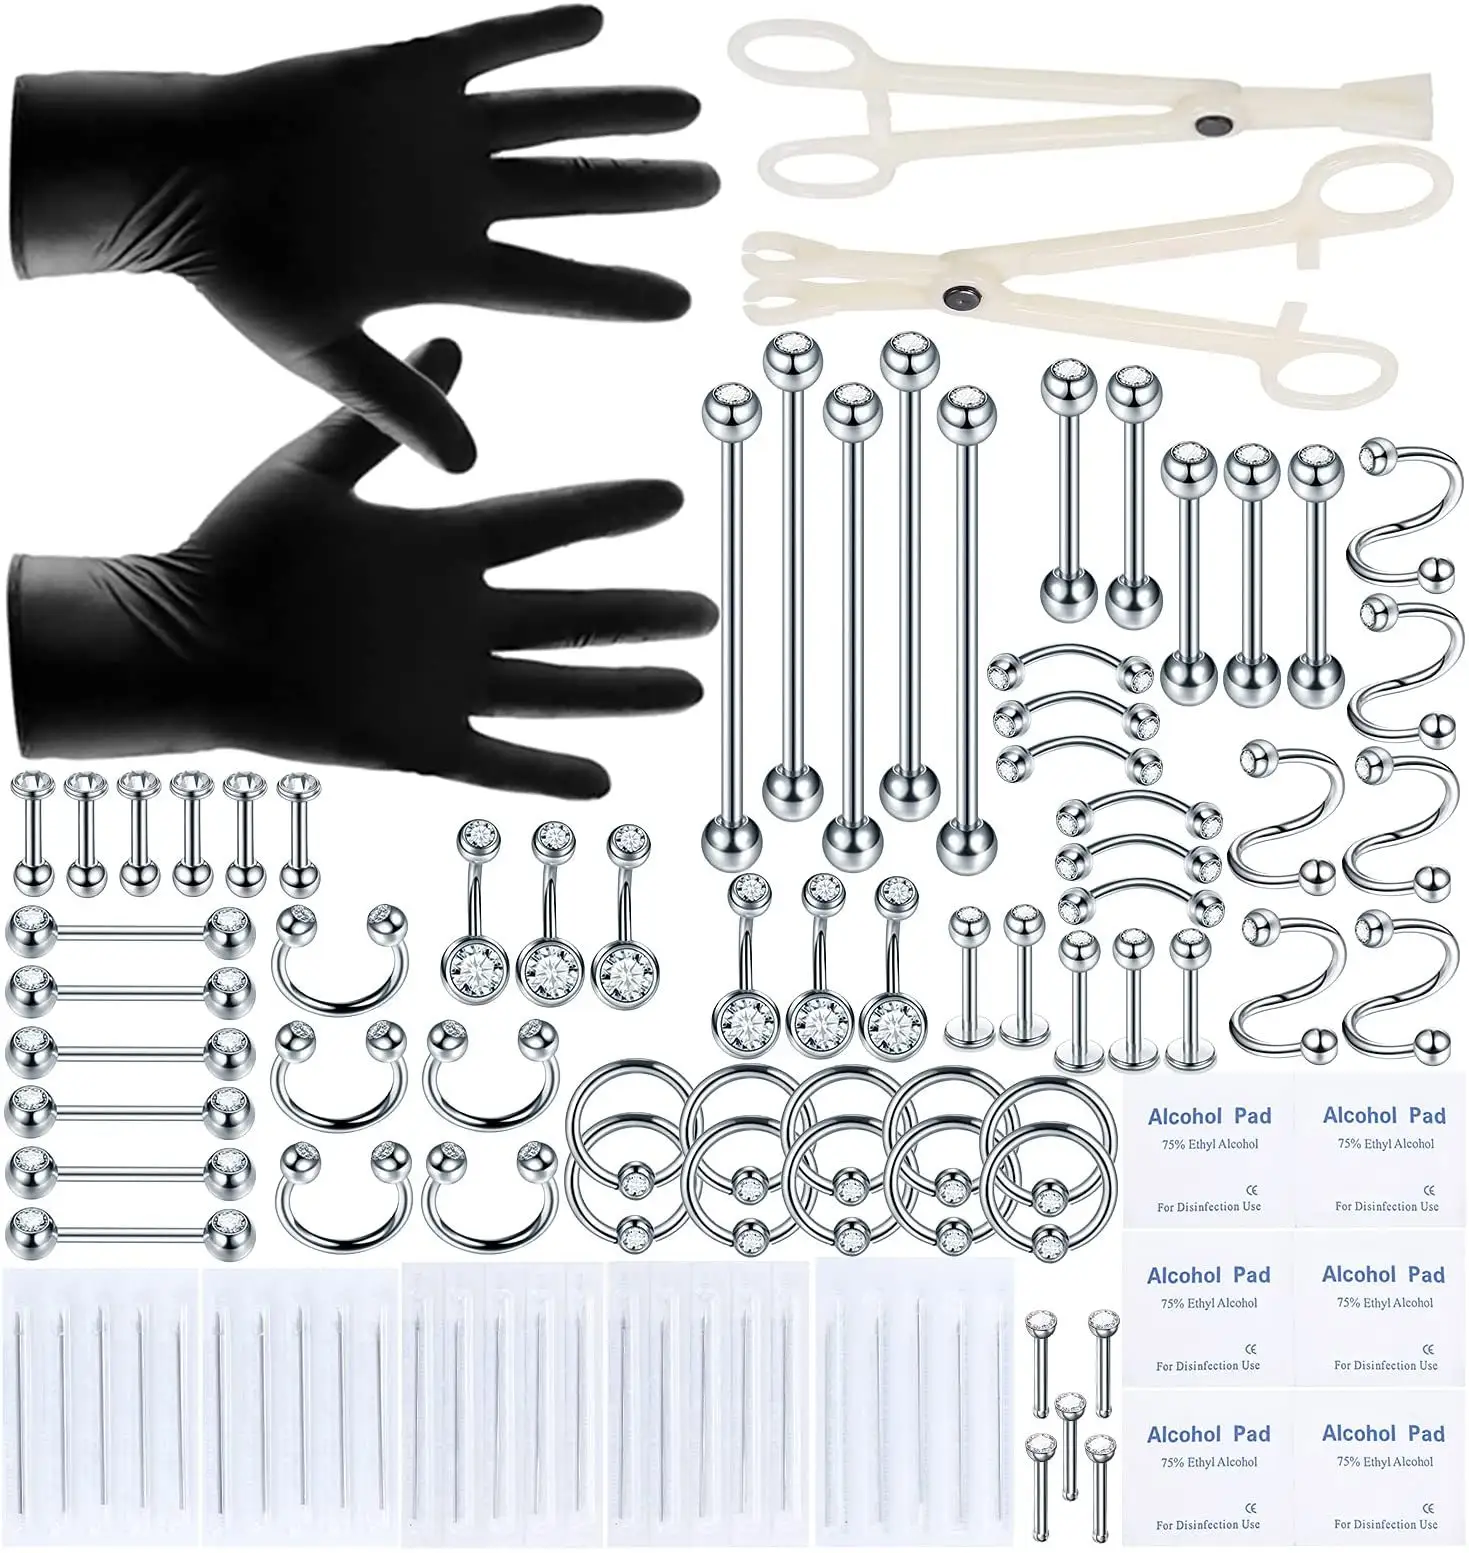 Professional Tattoo Piercing Tool Kit 140pcs/set Stainless Steel Nose Lip Tongue Cartilage Ring Body Jewelry Nose Ring Set